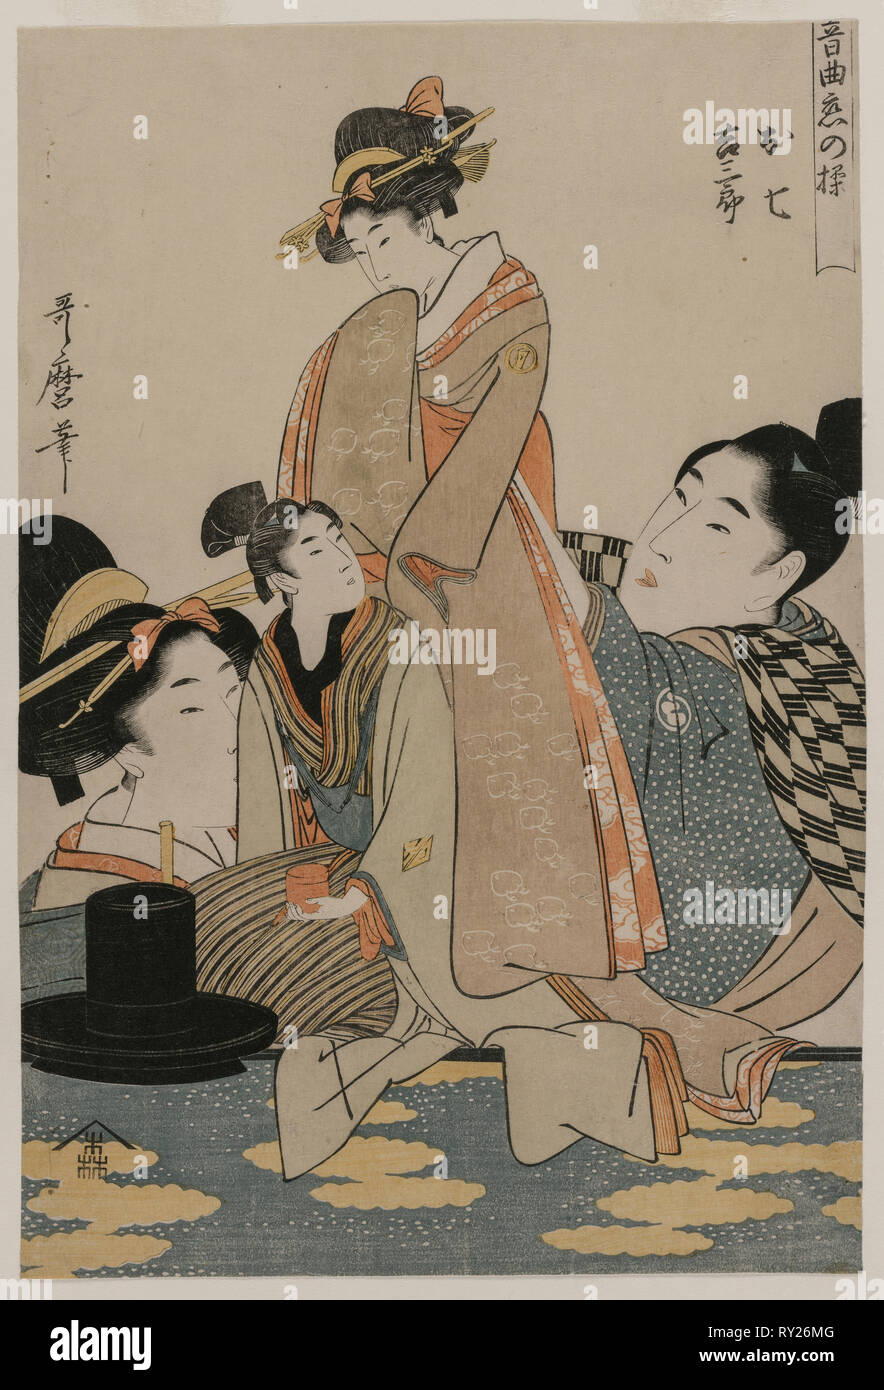 Oshichi and Kichisaburo (from the series Music on the Theme of Constancy in Love), c. 1800. Kitagawa Utamaro (Japanese, 1753?-1806). Color woodblock print; sheet: 36.6 x 24.5 cm (14 7/16 x 9 5/8 in Stock Photo